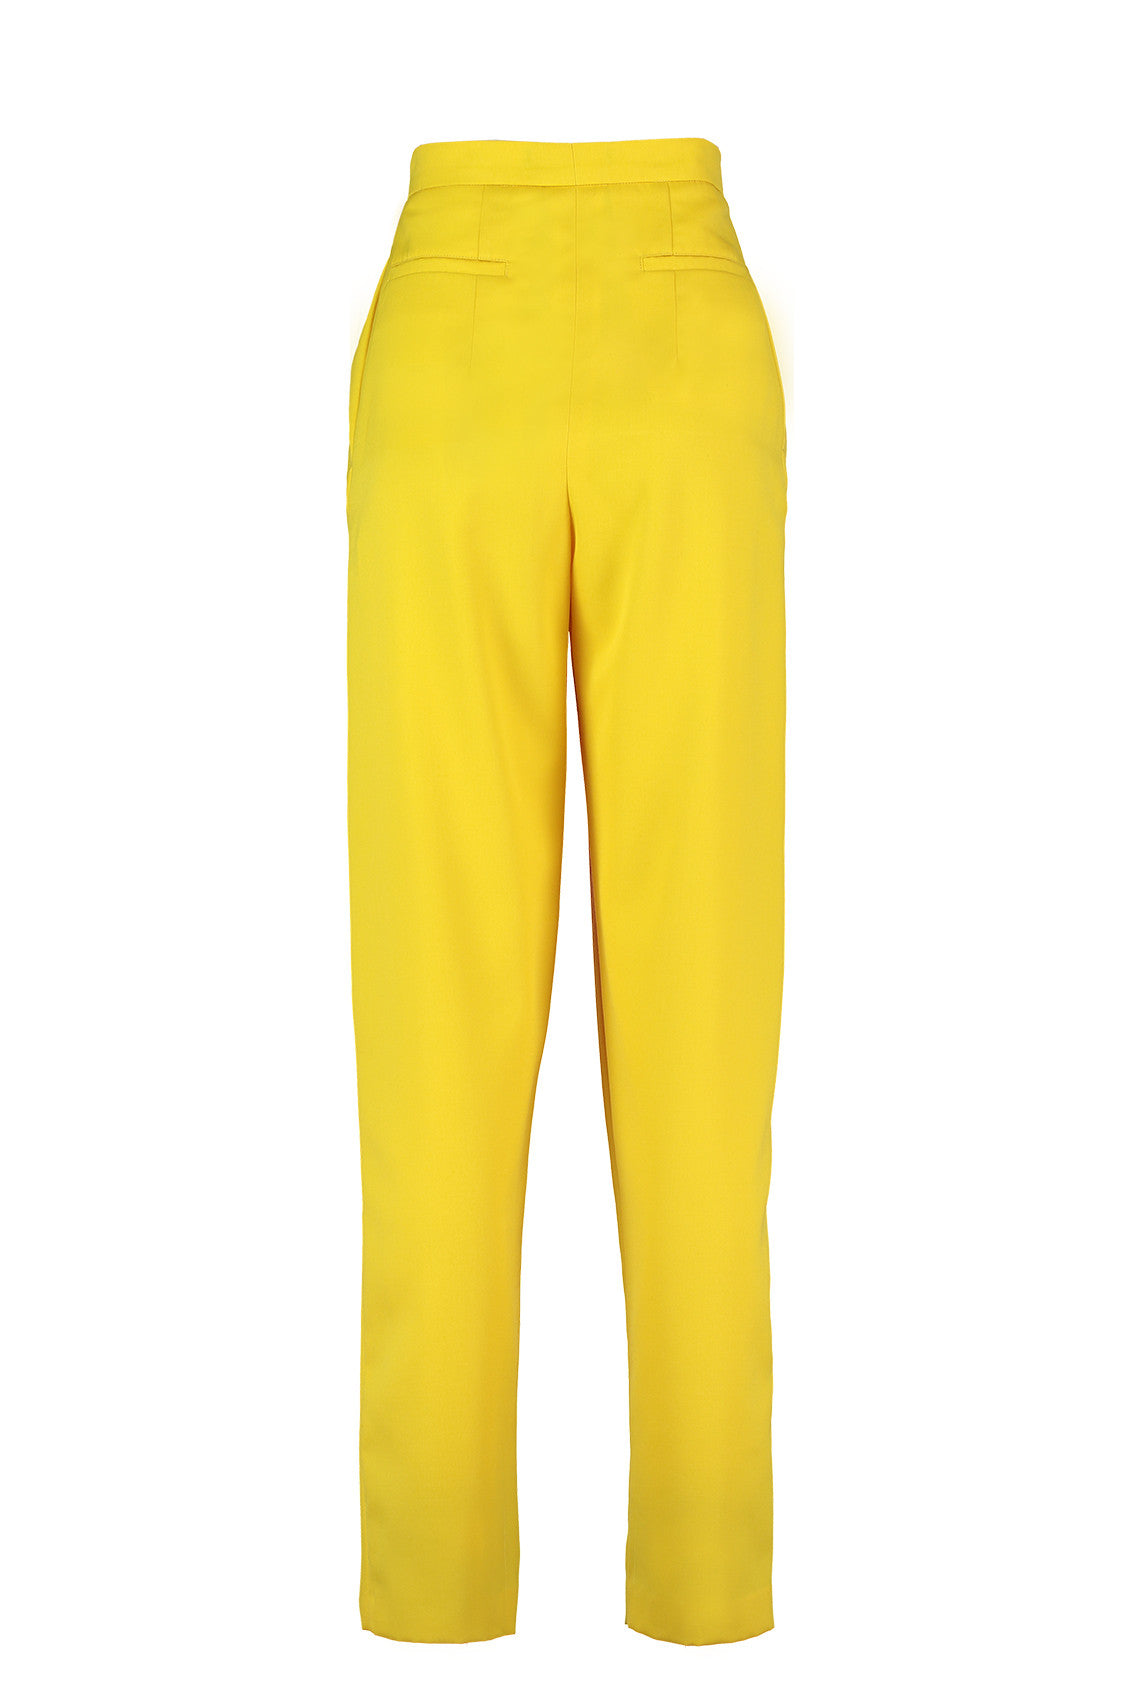 Ogee Trousers